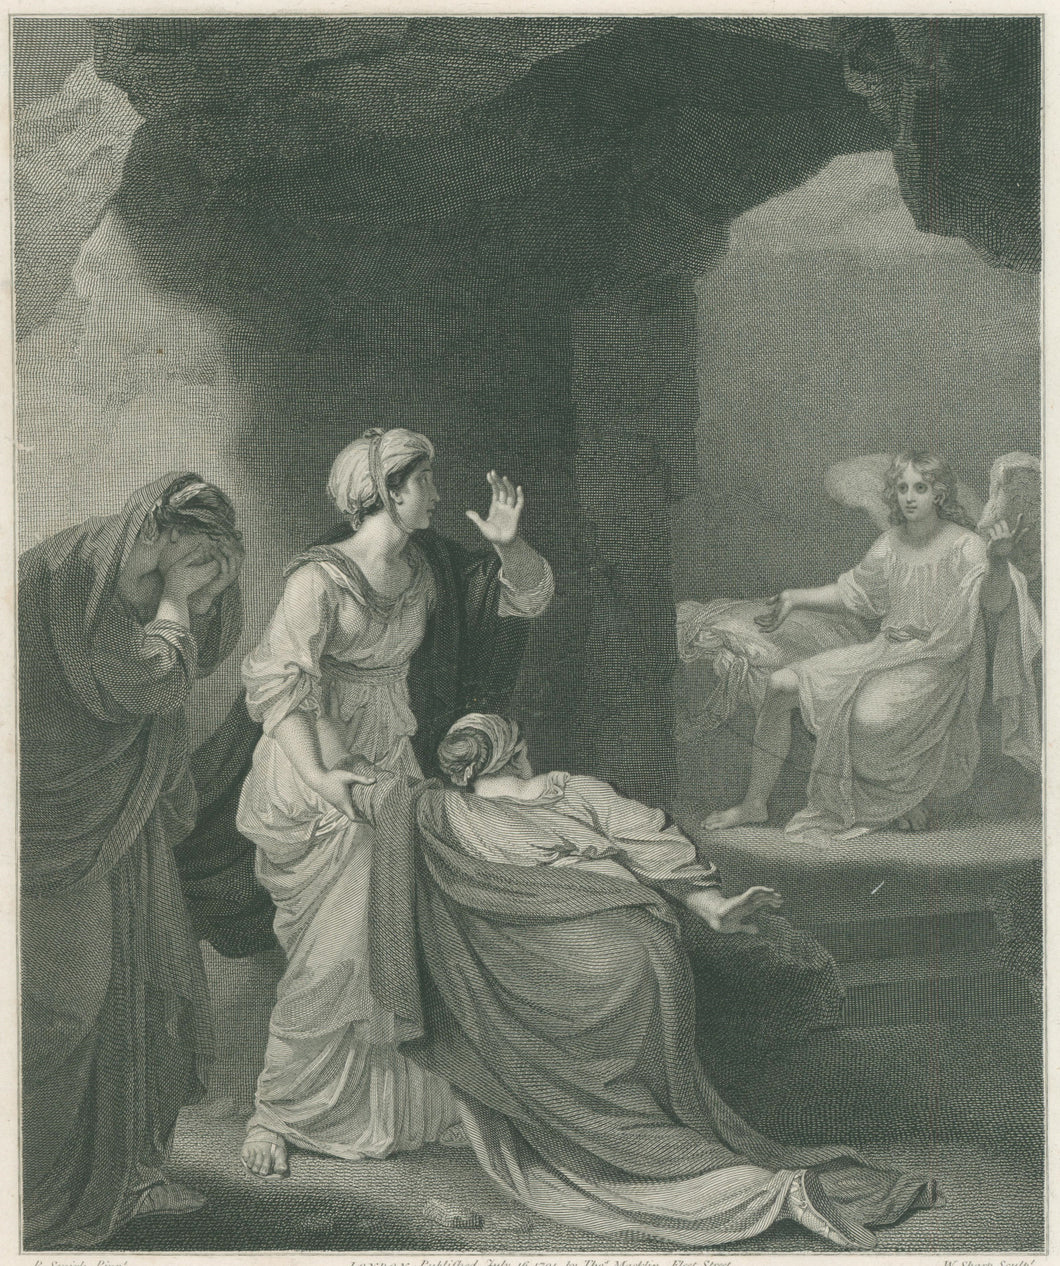 Smirke, Robert “The Marys at the Sepulchre.” From Thomas Macklin’s 